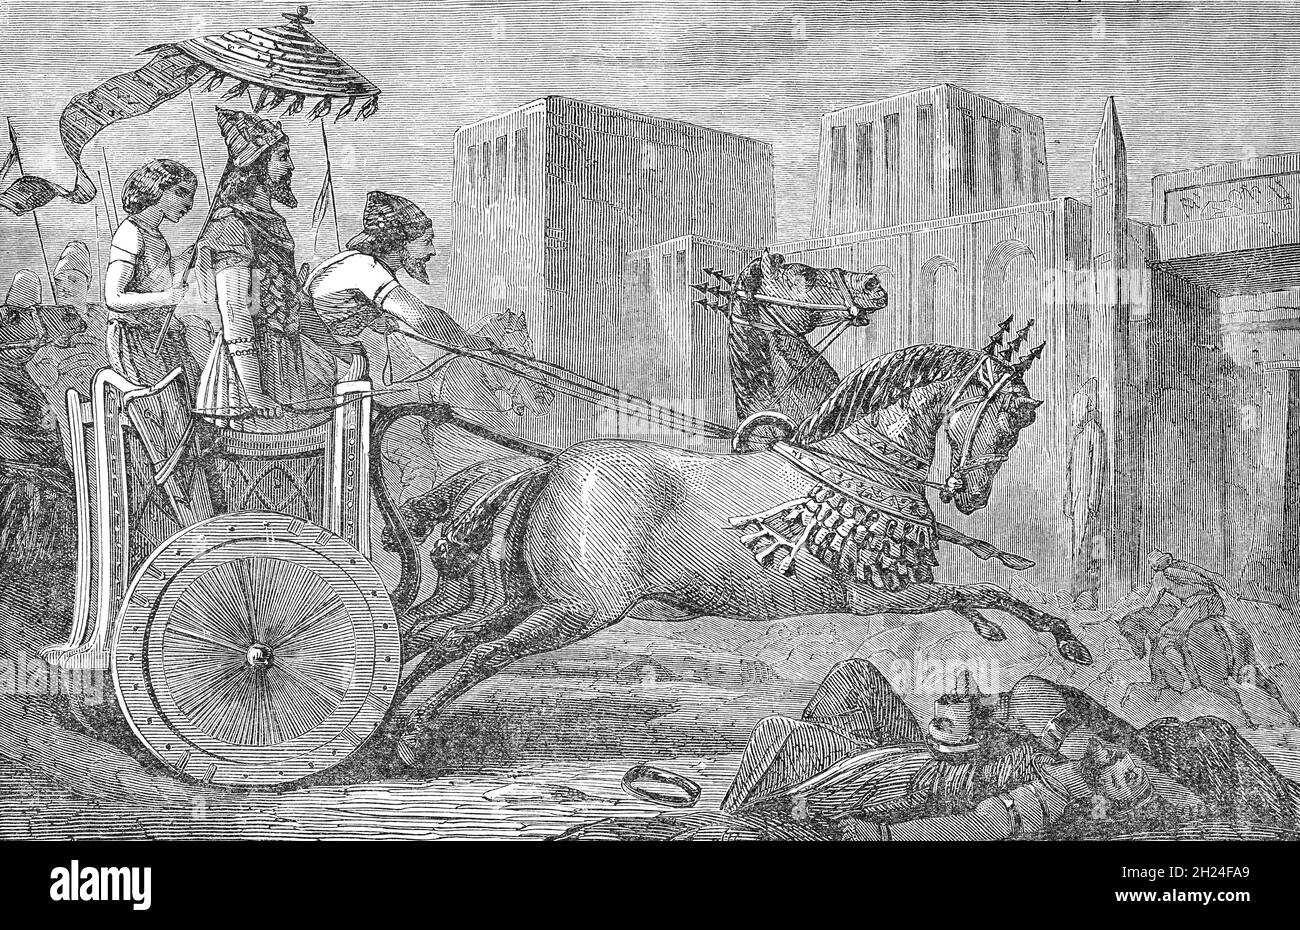 A late 19th Century illustration of  Cambyses II, the second King of Kings of the Achaemenid Empire from 530 to 522 BC entering Memphis in Egypt. He was the son and successor of Cyrus the Great. The conquest of Egypt, planned by Cyrus, was the major achievement of Cambyses’ reign and took place during the reign of Psamtik III. After Cambyses had won the Battle of Pelusium (525) in the Nile Delta and had captured Heliopolis and Memphis, Egyptian resistance collapsed. Stock Photo